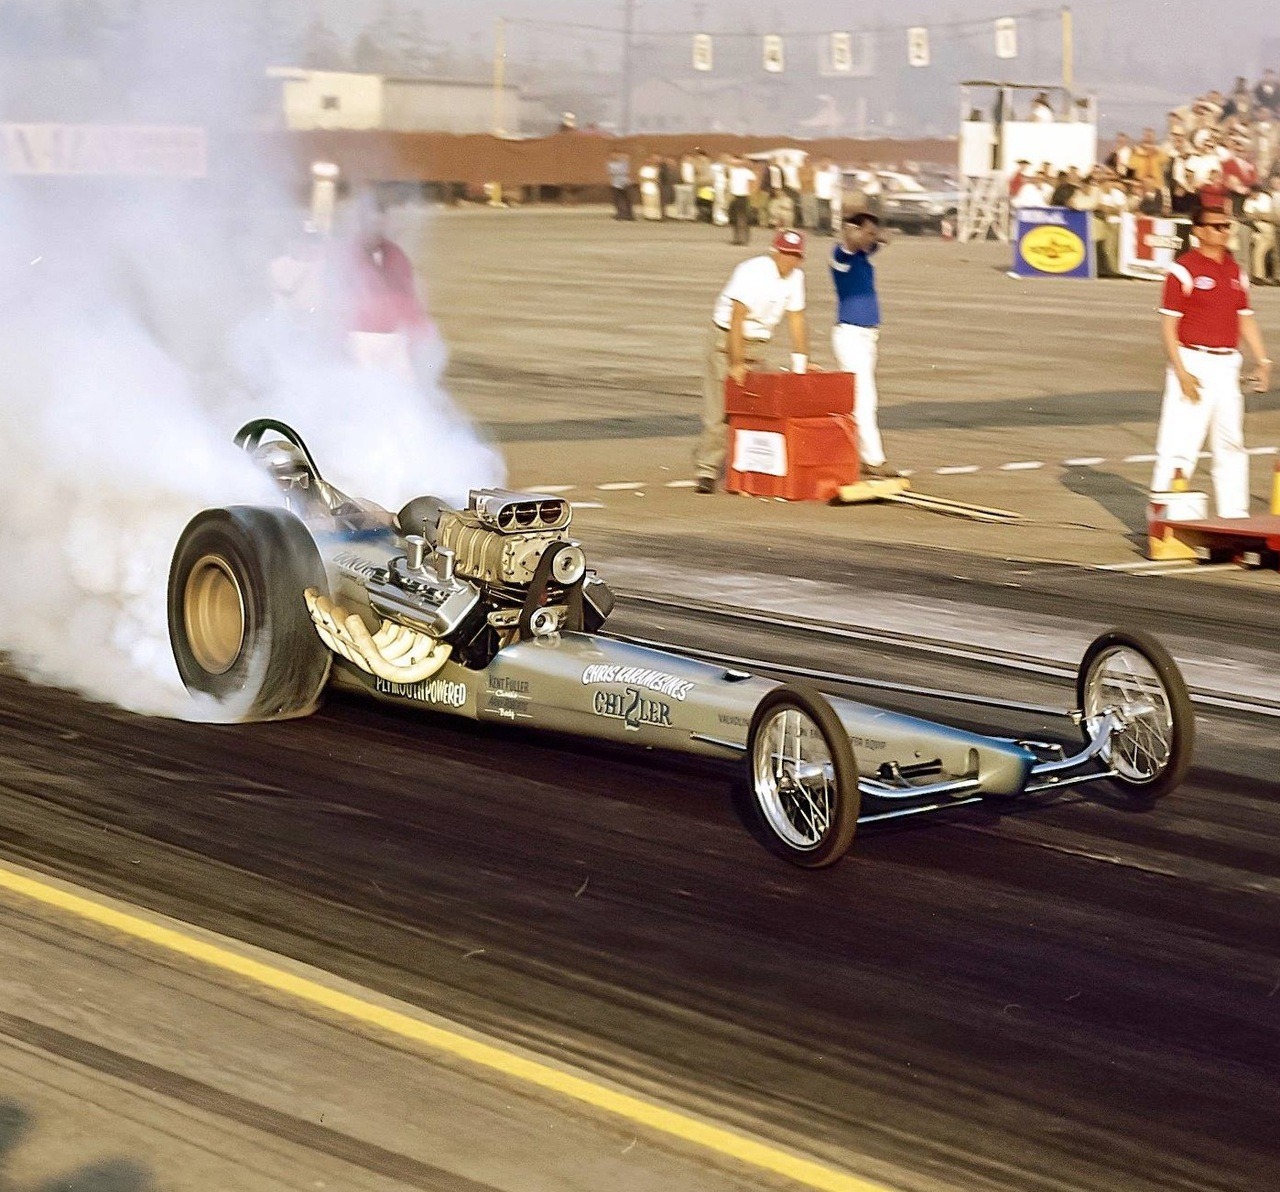 old dragsters!!! - Page 5 Tumblr_pldq1a77jt1rn8k76o1_1280